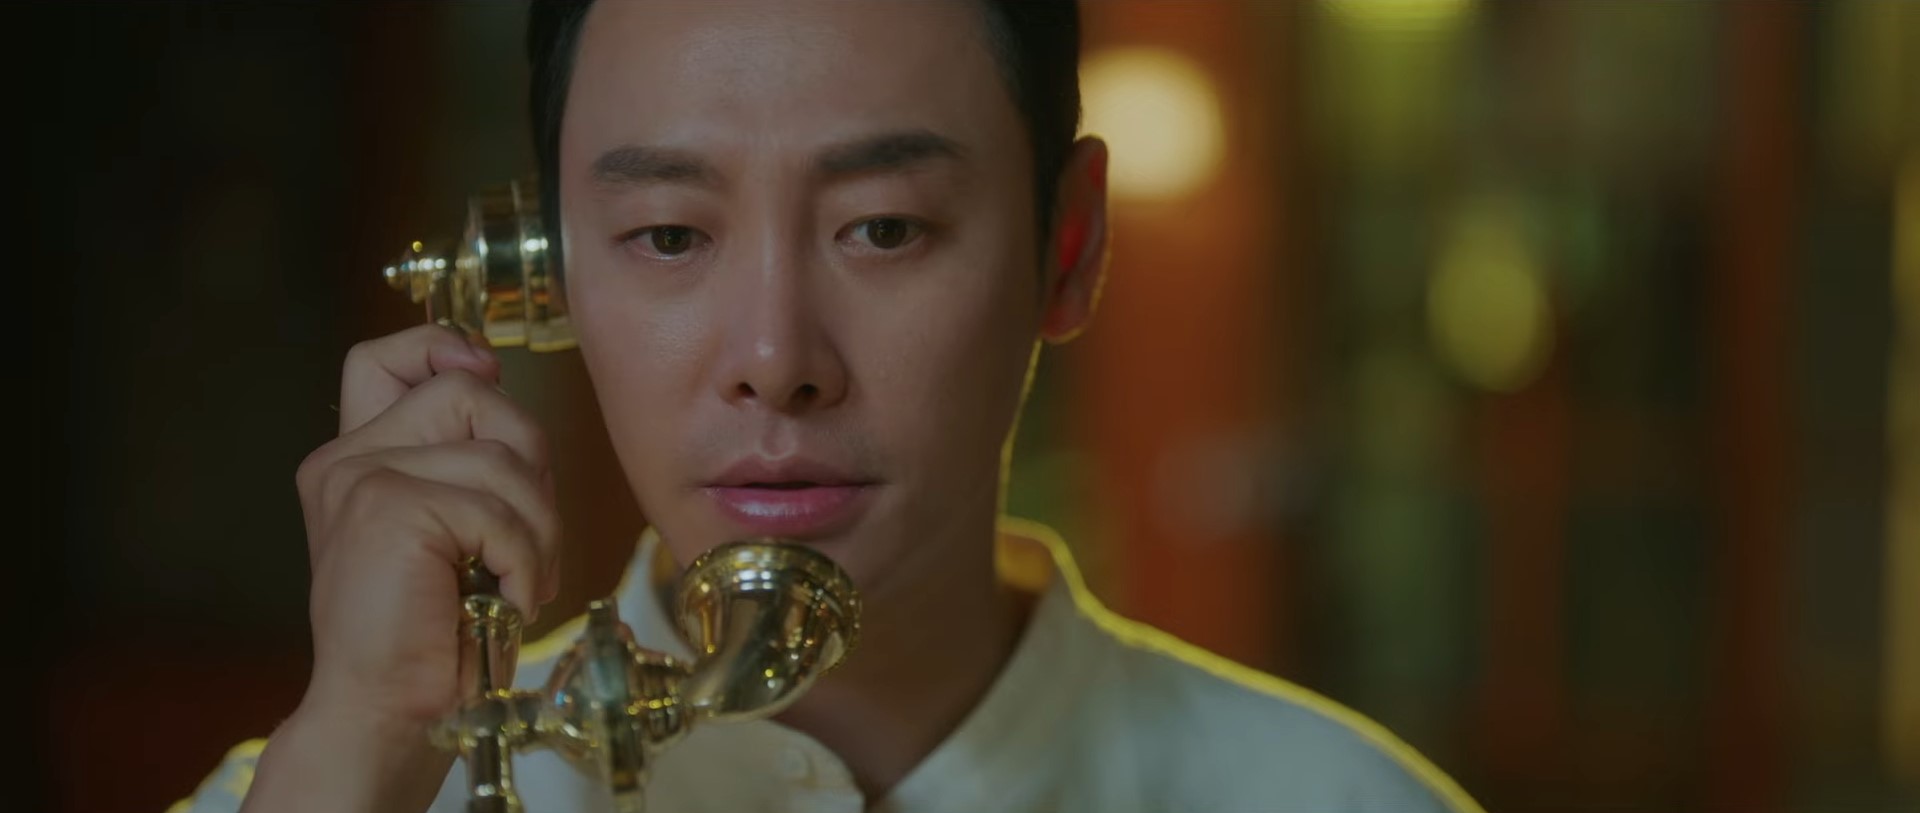 My Perfect Stranger Episode 7 Recap/Review: One Variable Creates More Variables